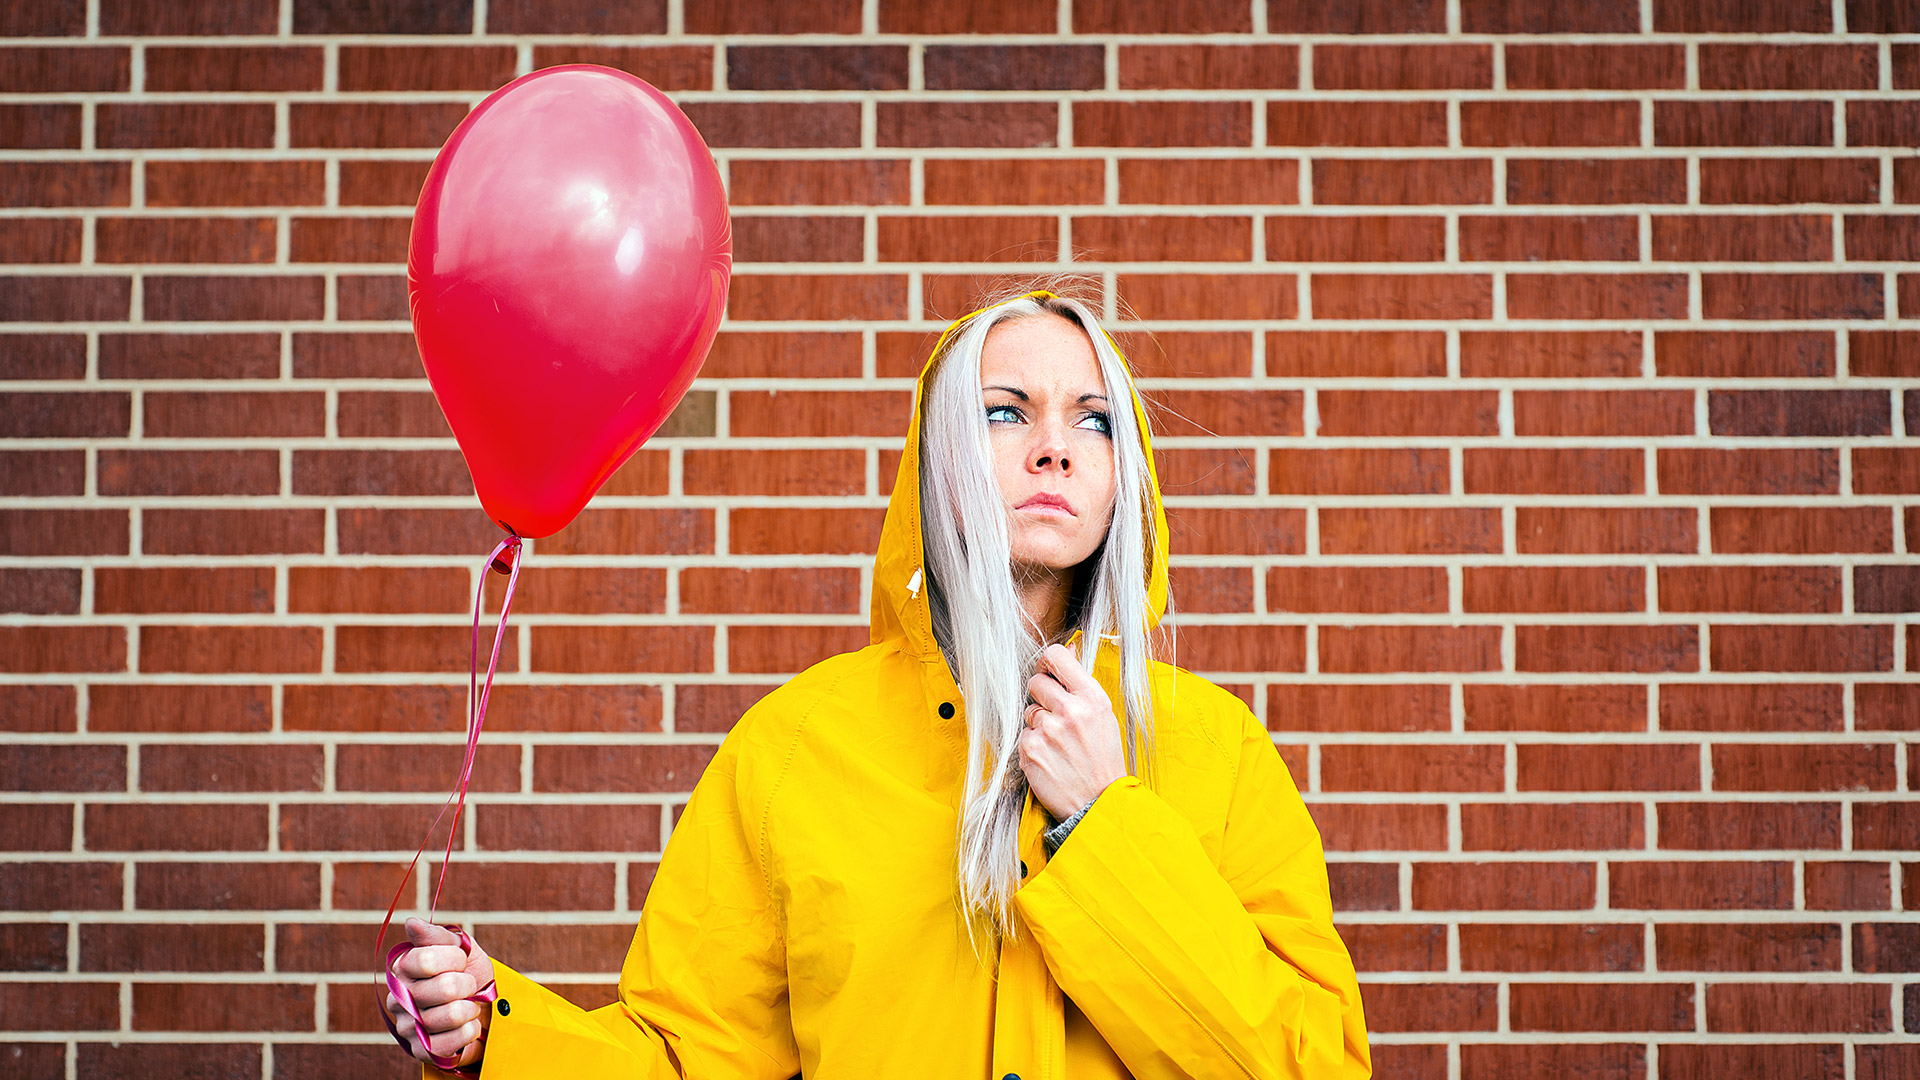 Woman holding a red balloon while wearing a bright yellow raincoat.